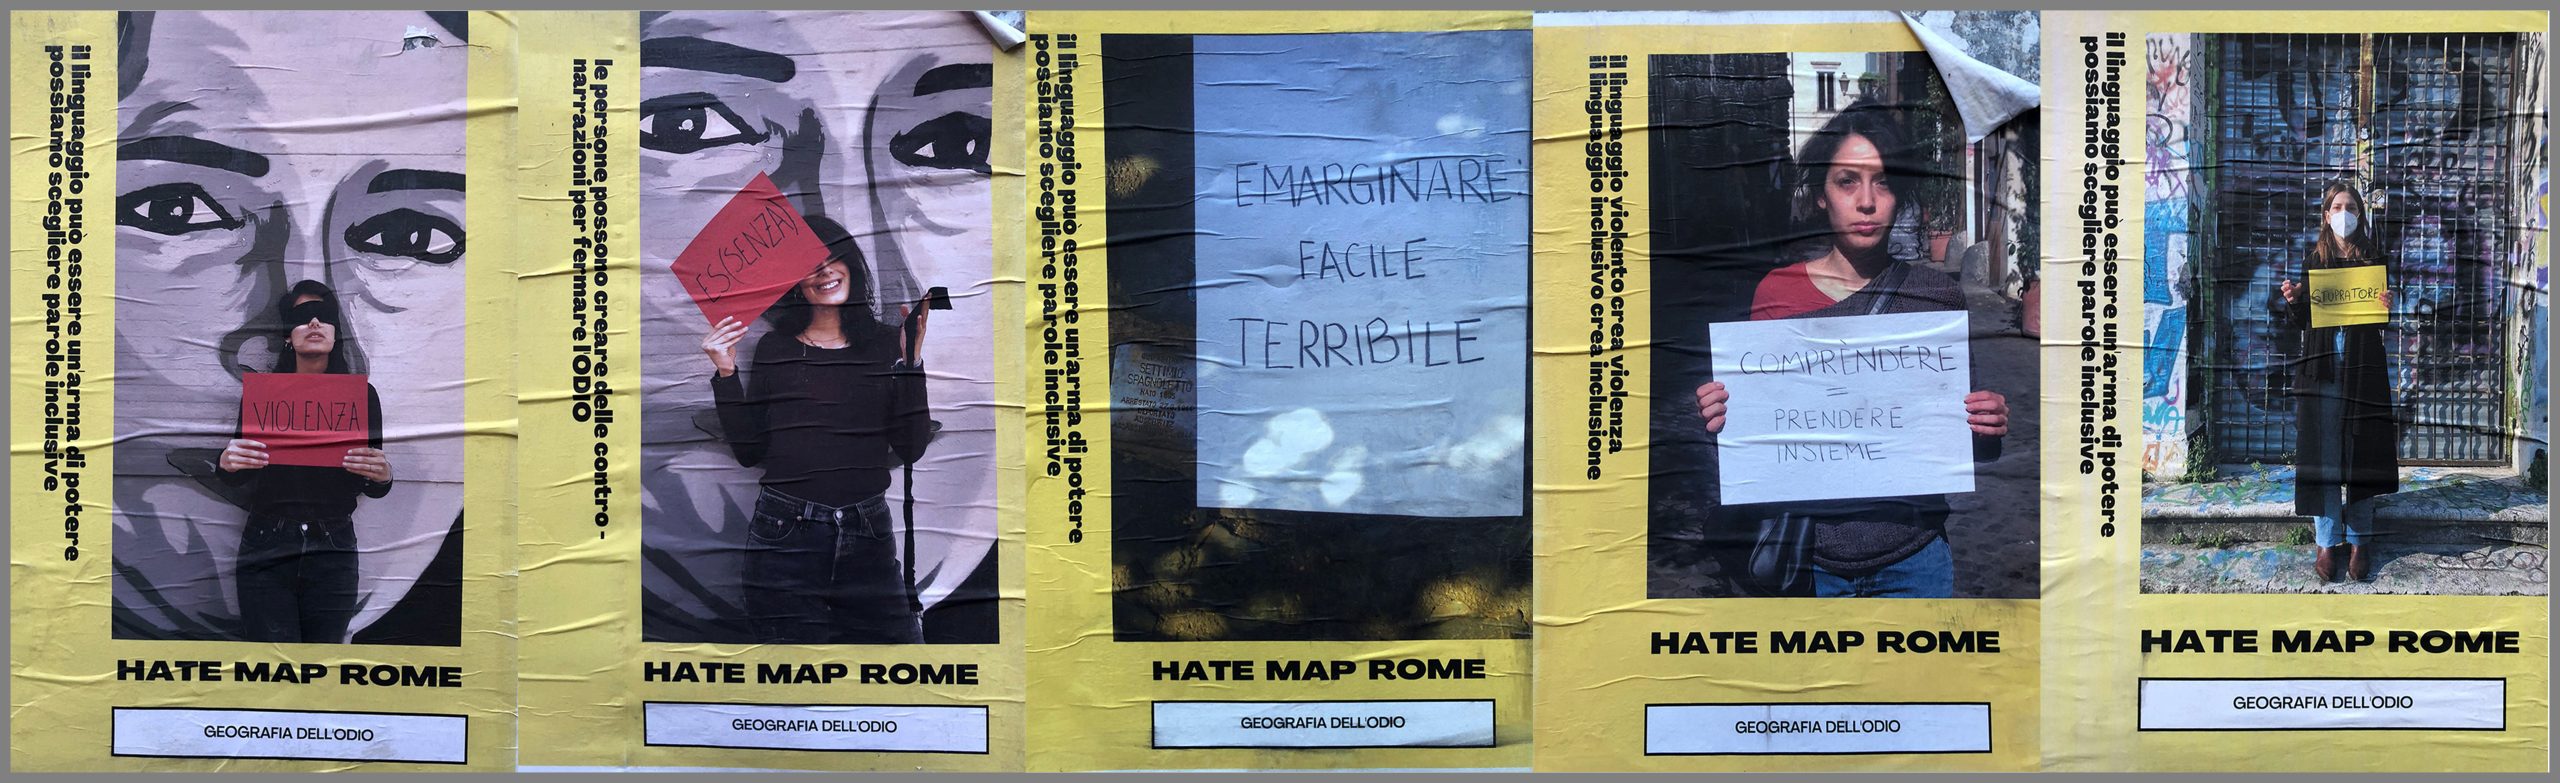 alt tag hate map rome